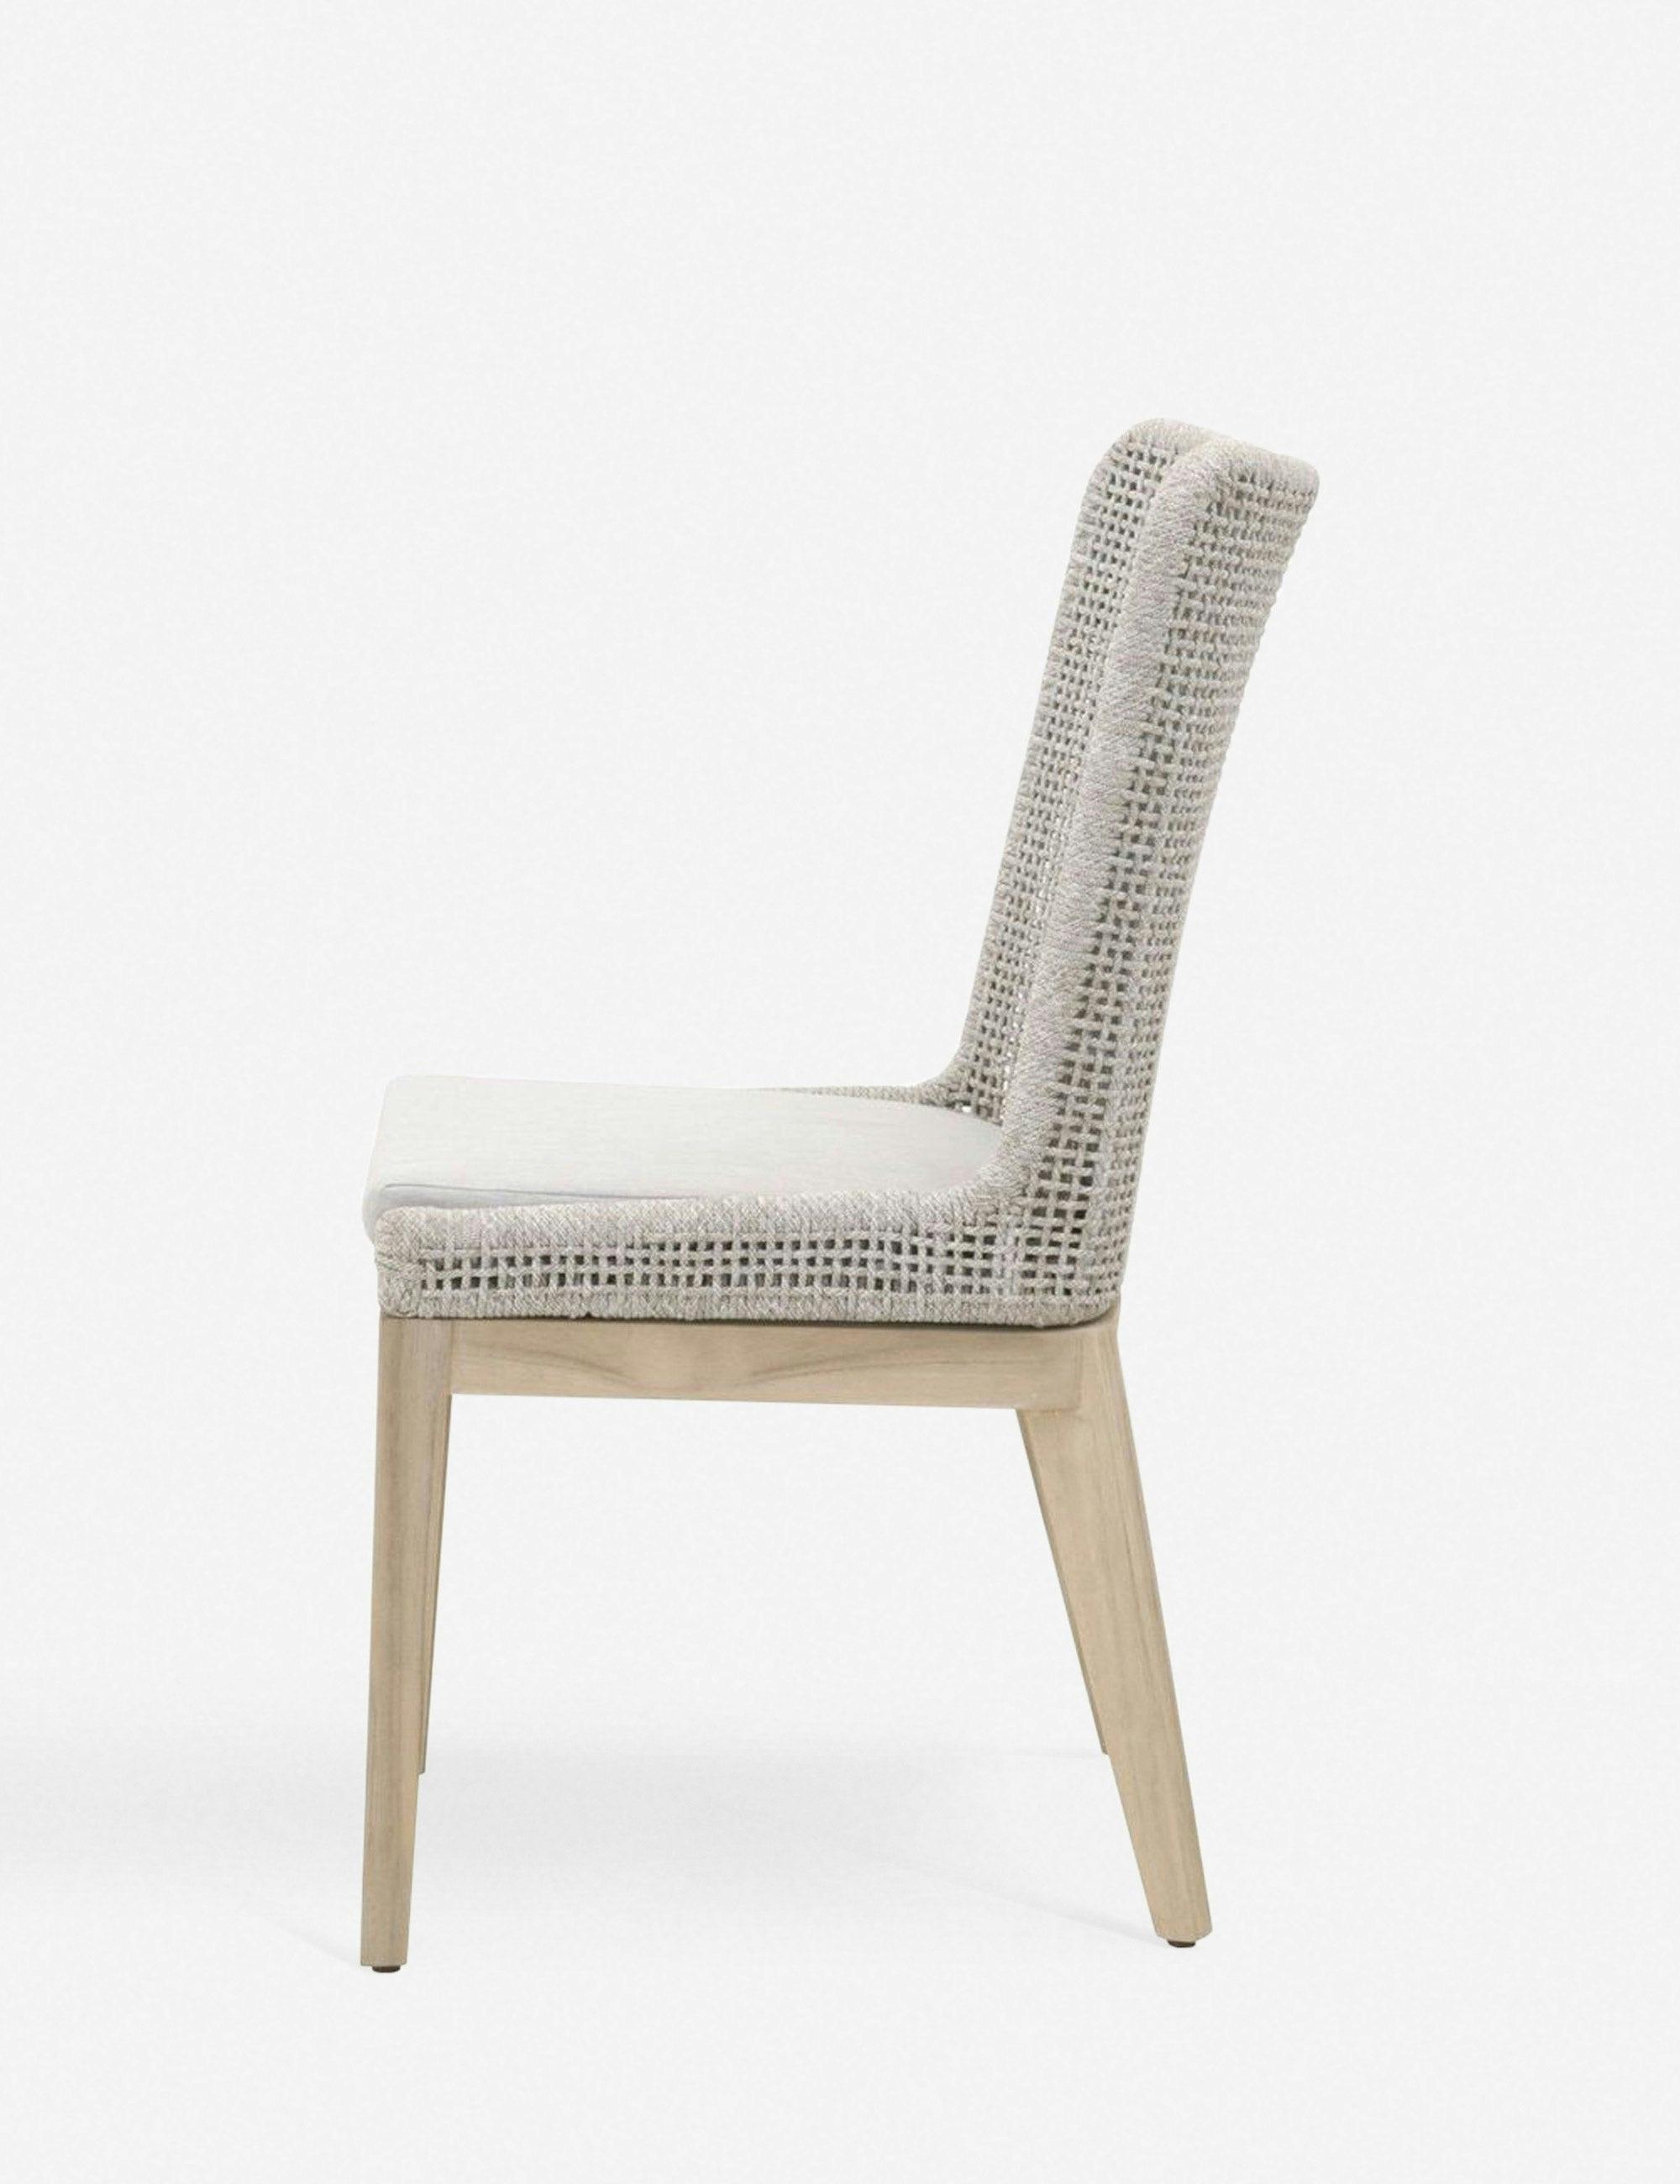 Winnetka Transitional Gray Mesh and Teak Outdoor Dining Chair